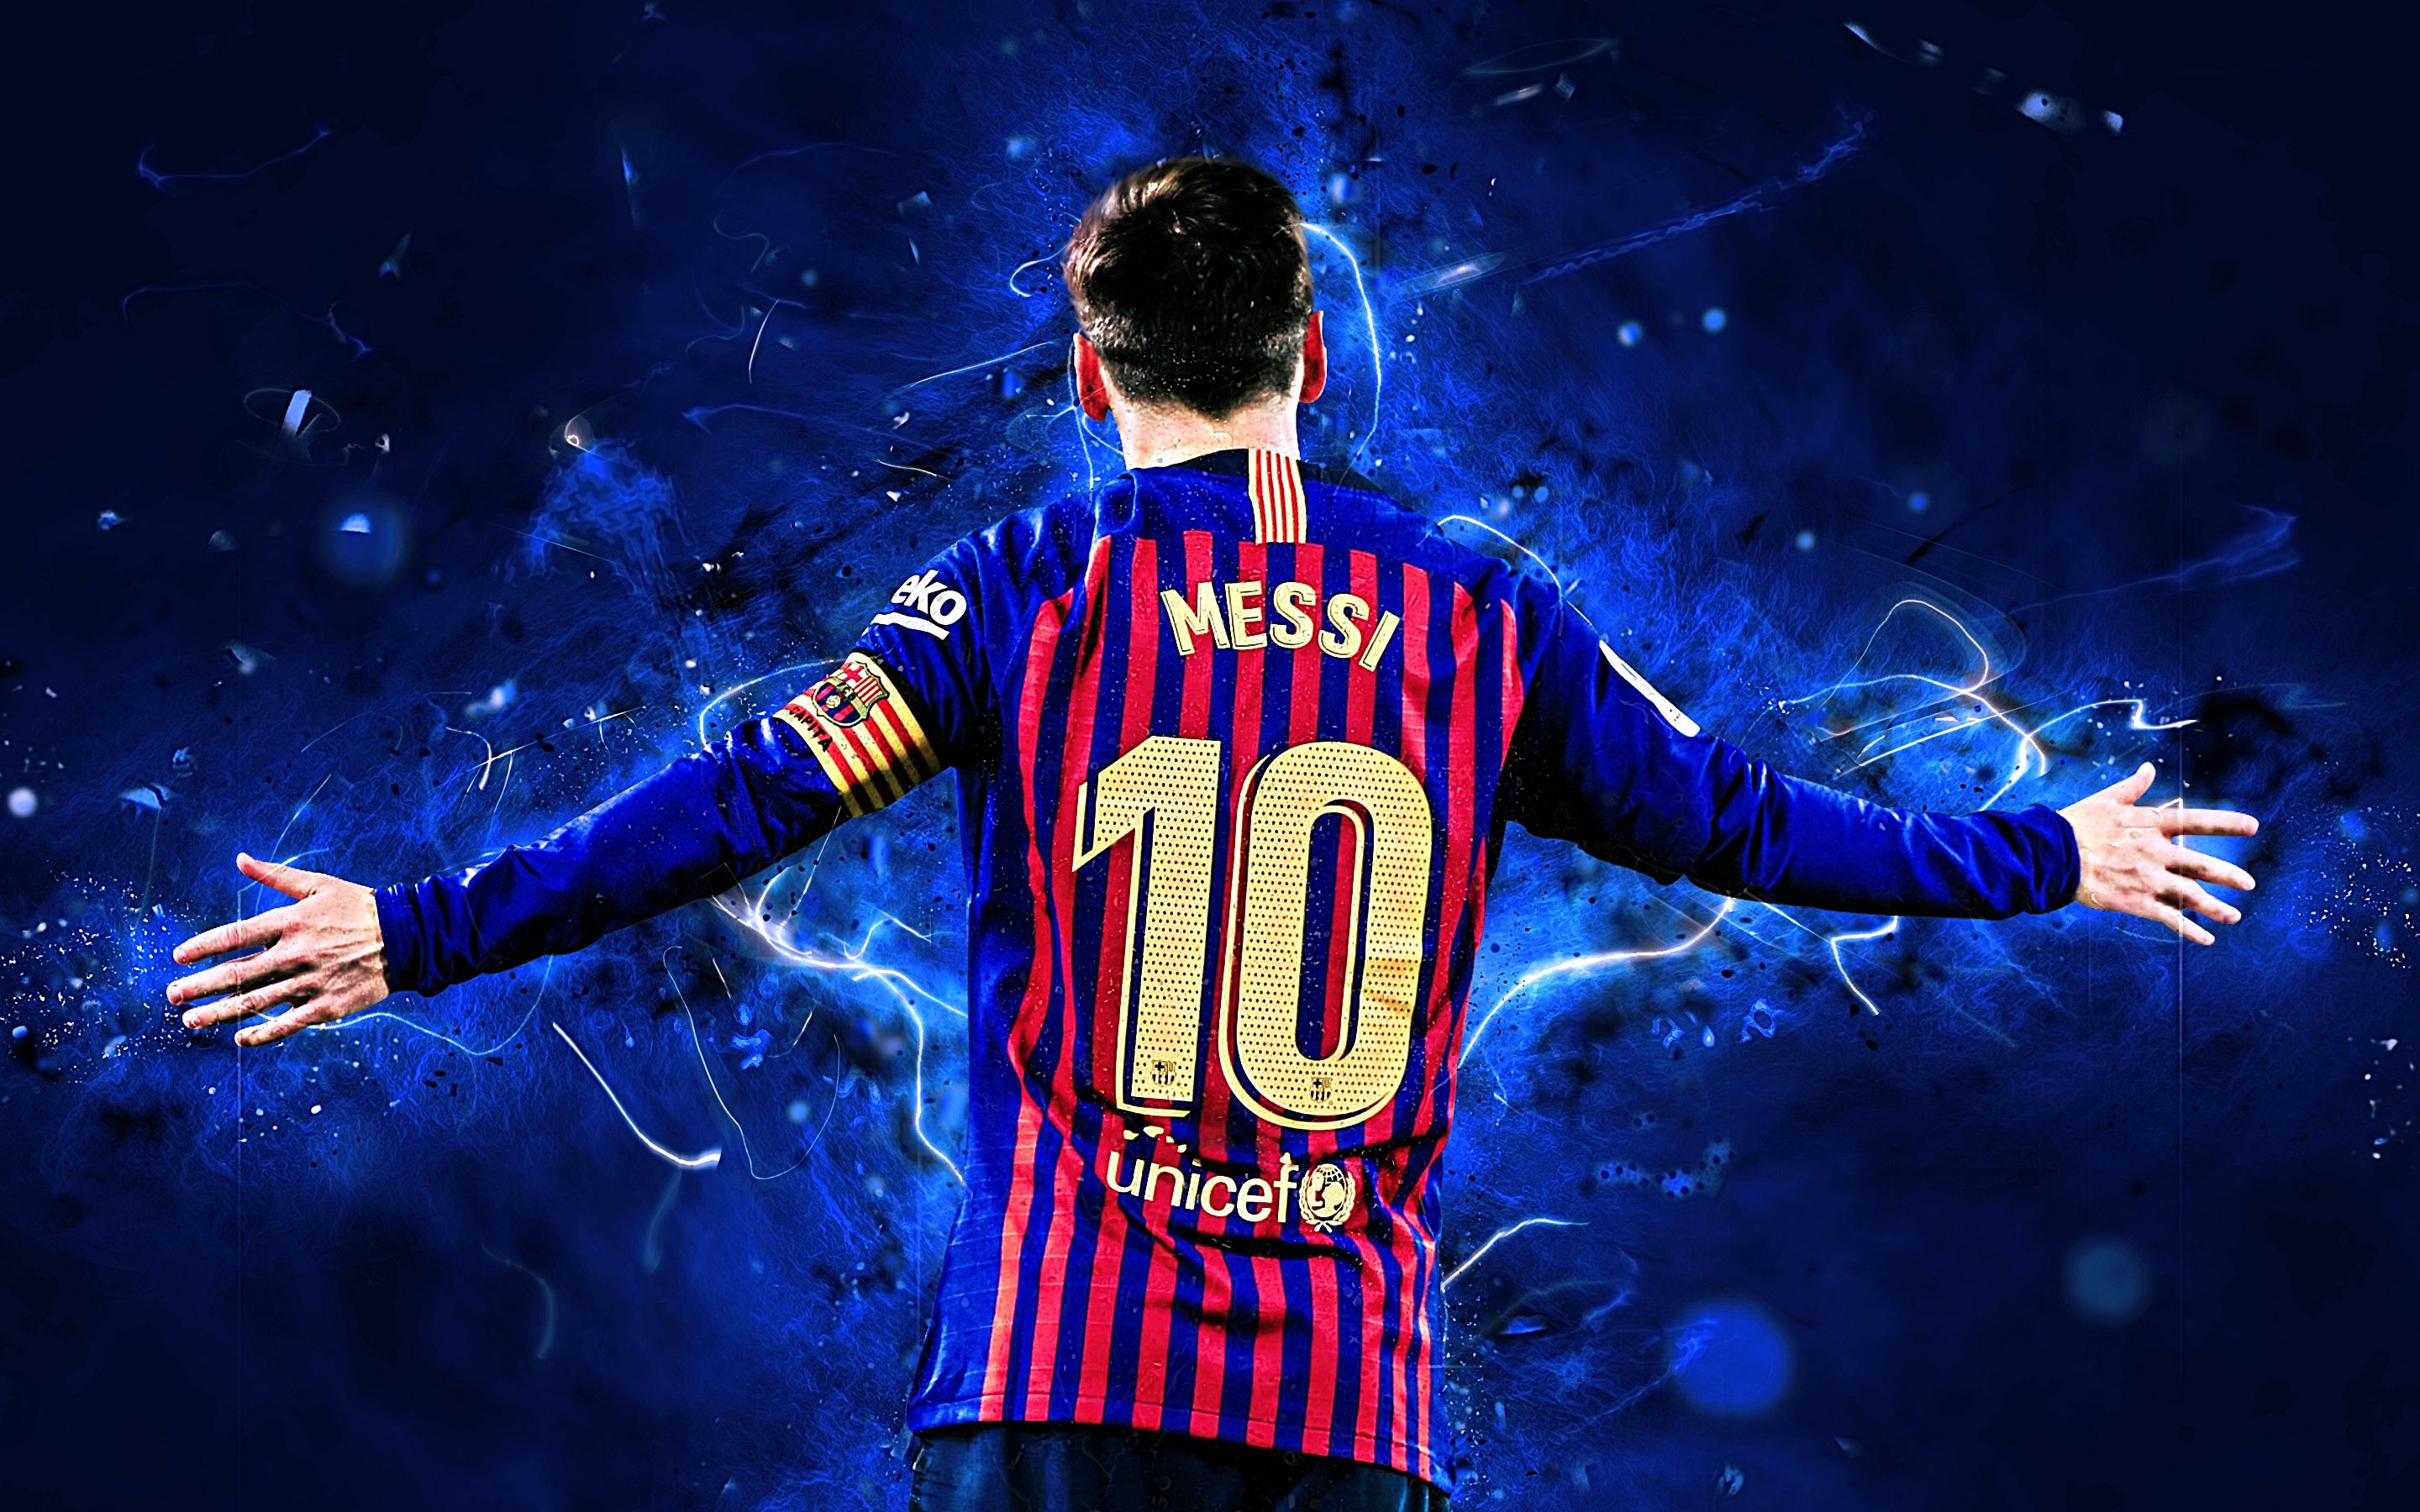 Messi Cool Wallpapers